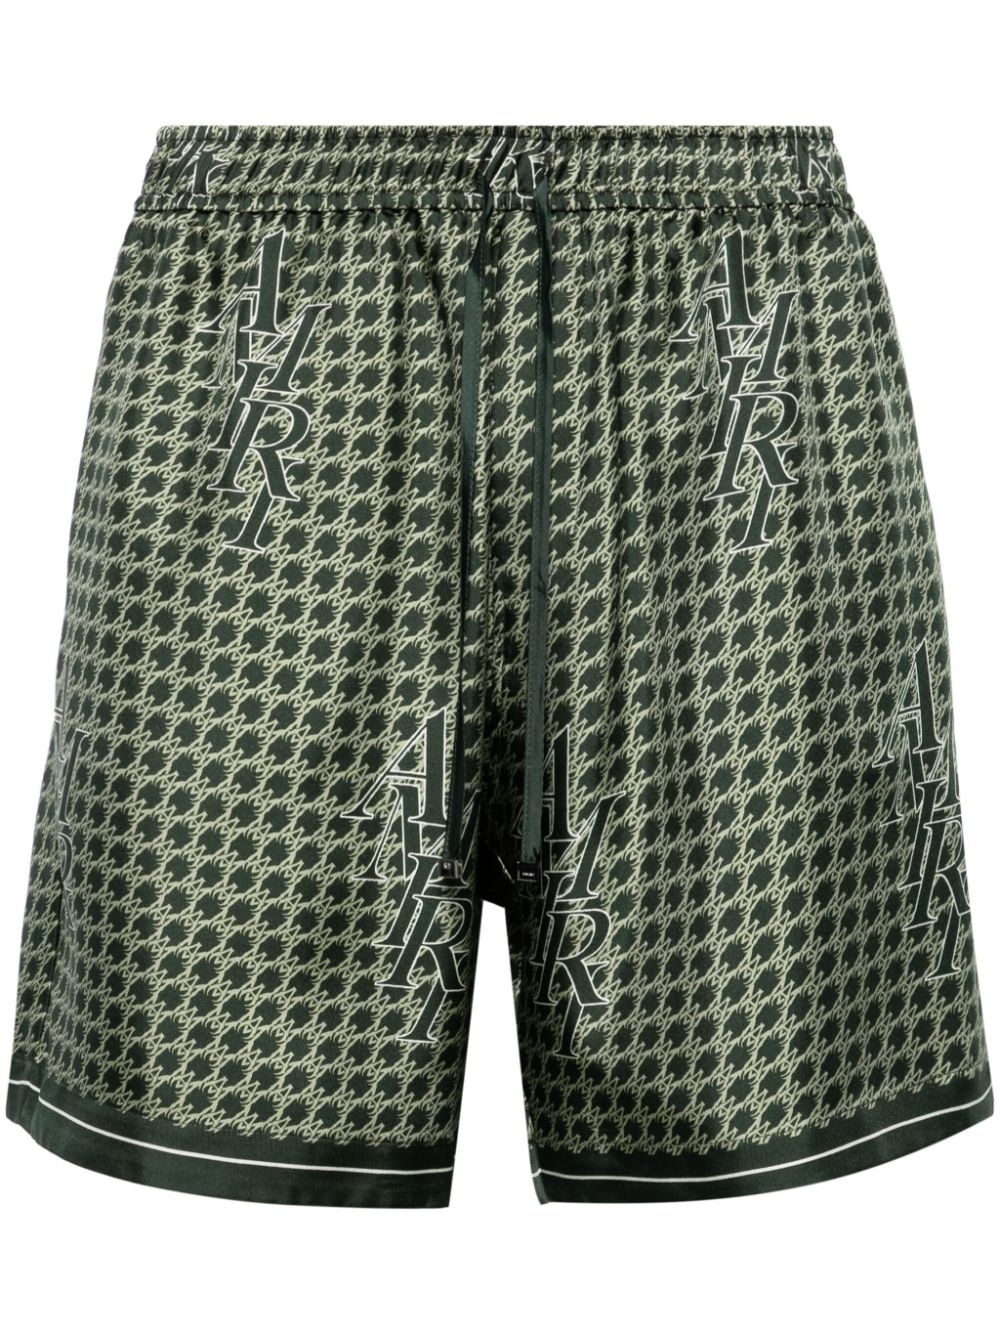 Staggered Houndstooth silk shorts - 1